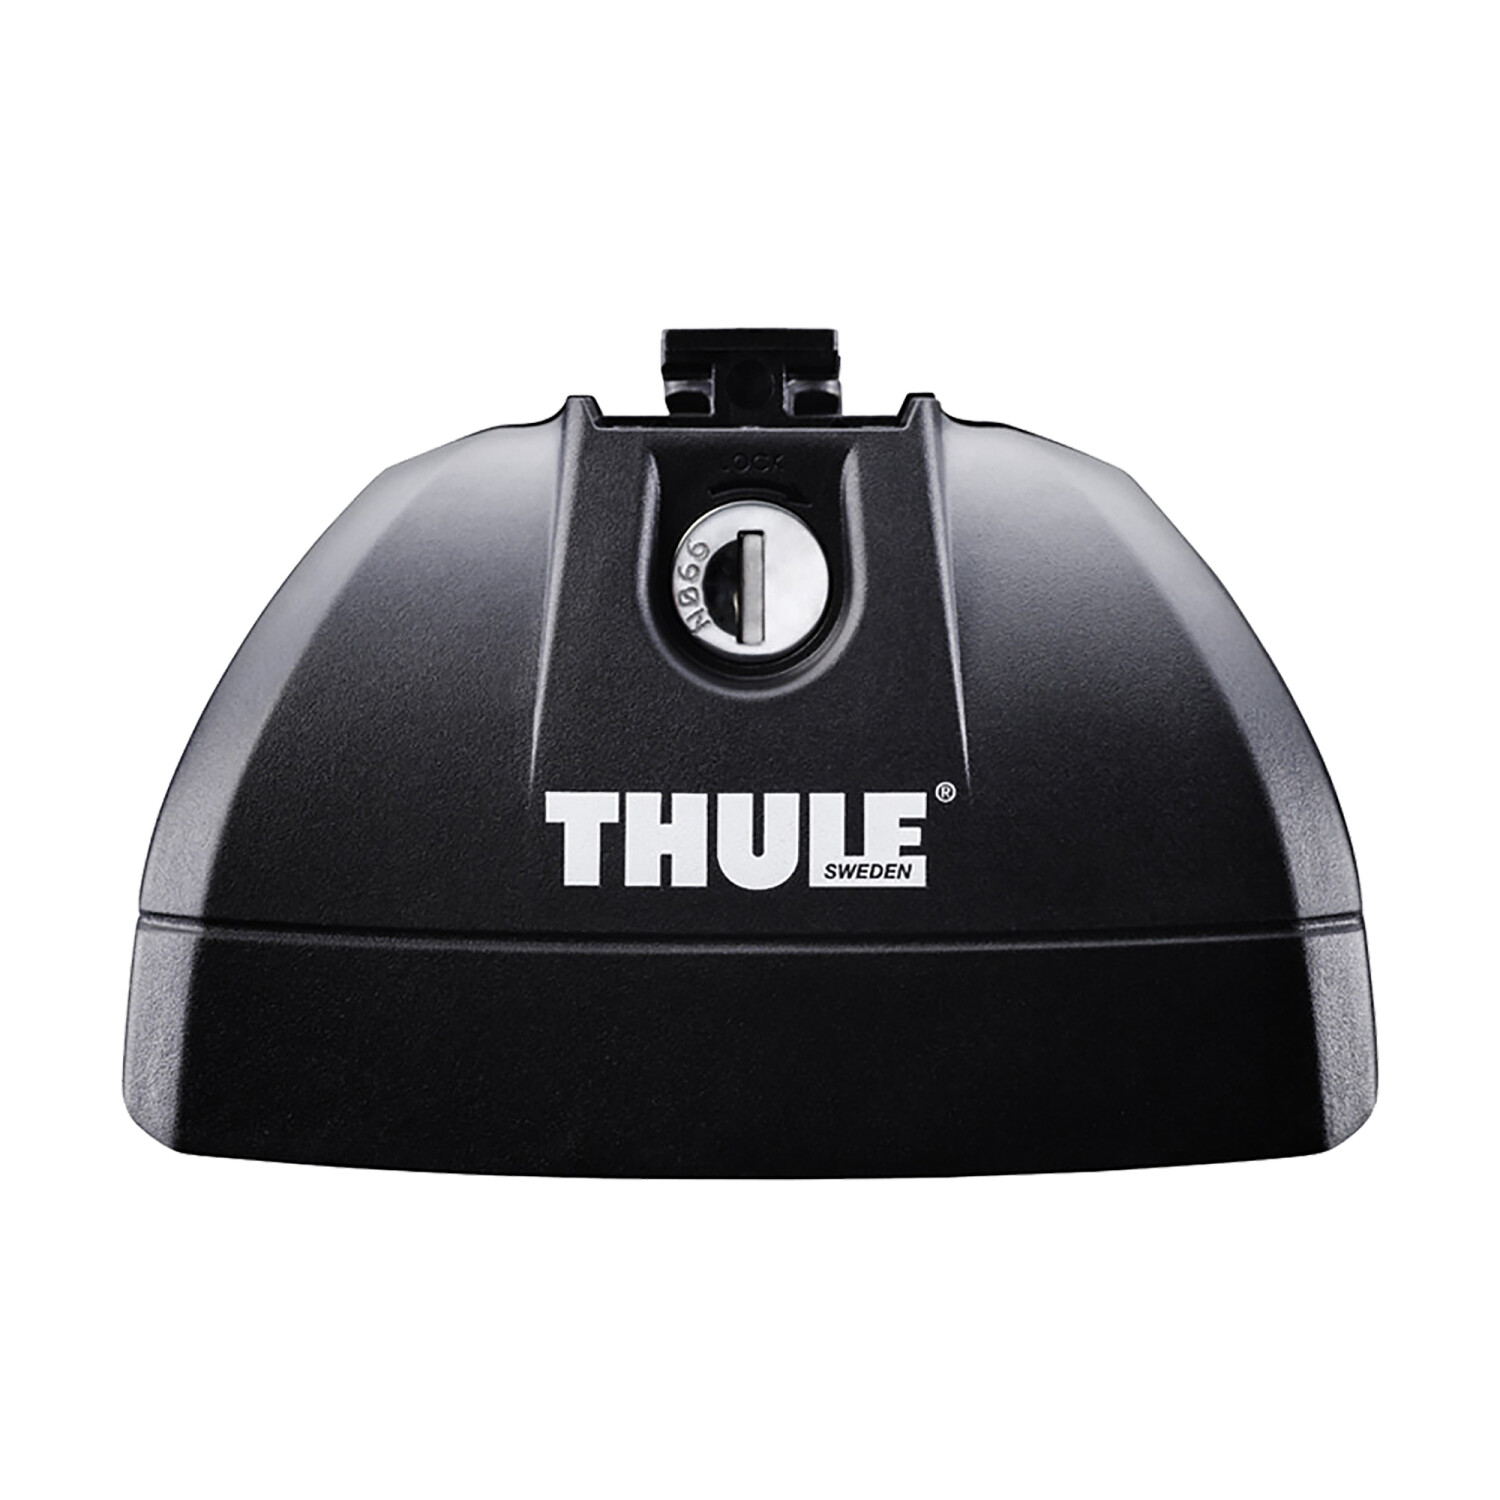 Photos - Roof Box Thule Rapid System 7531 